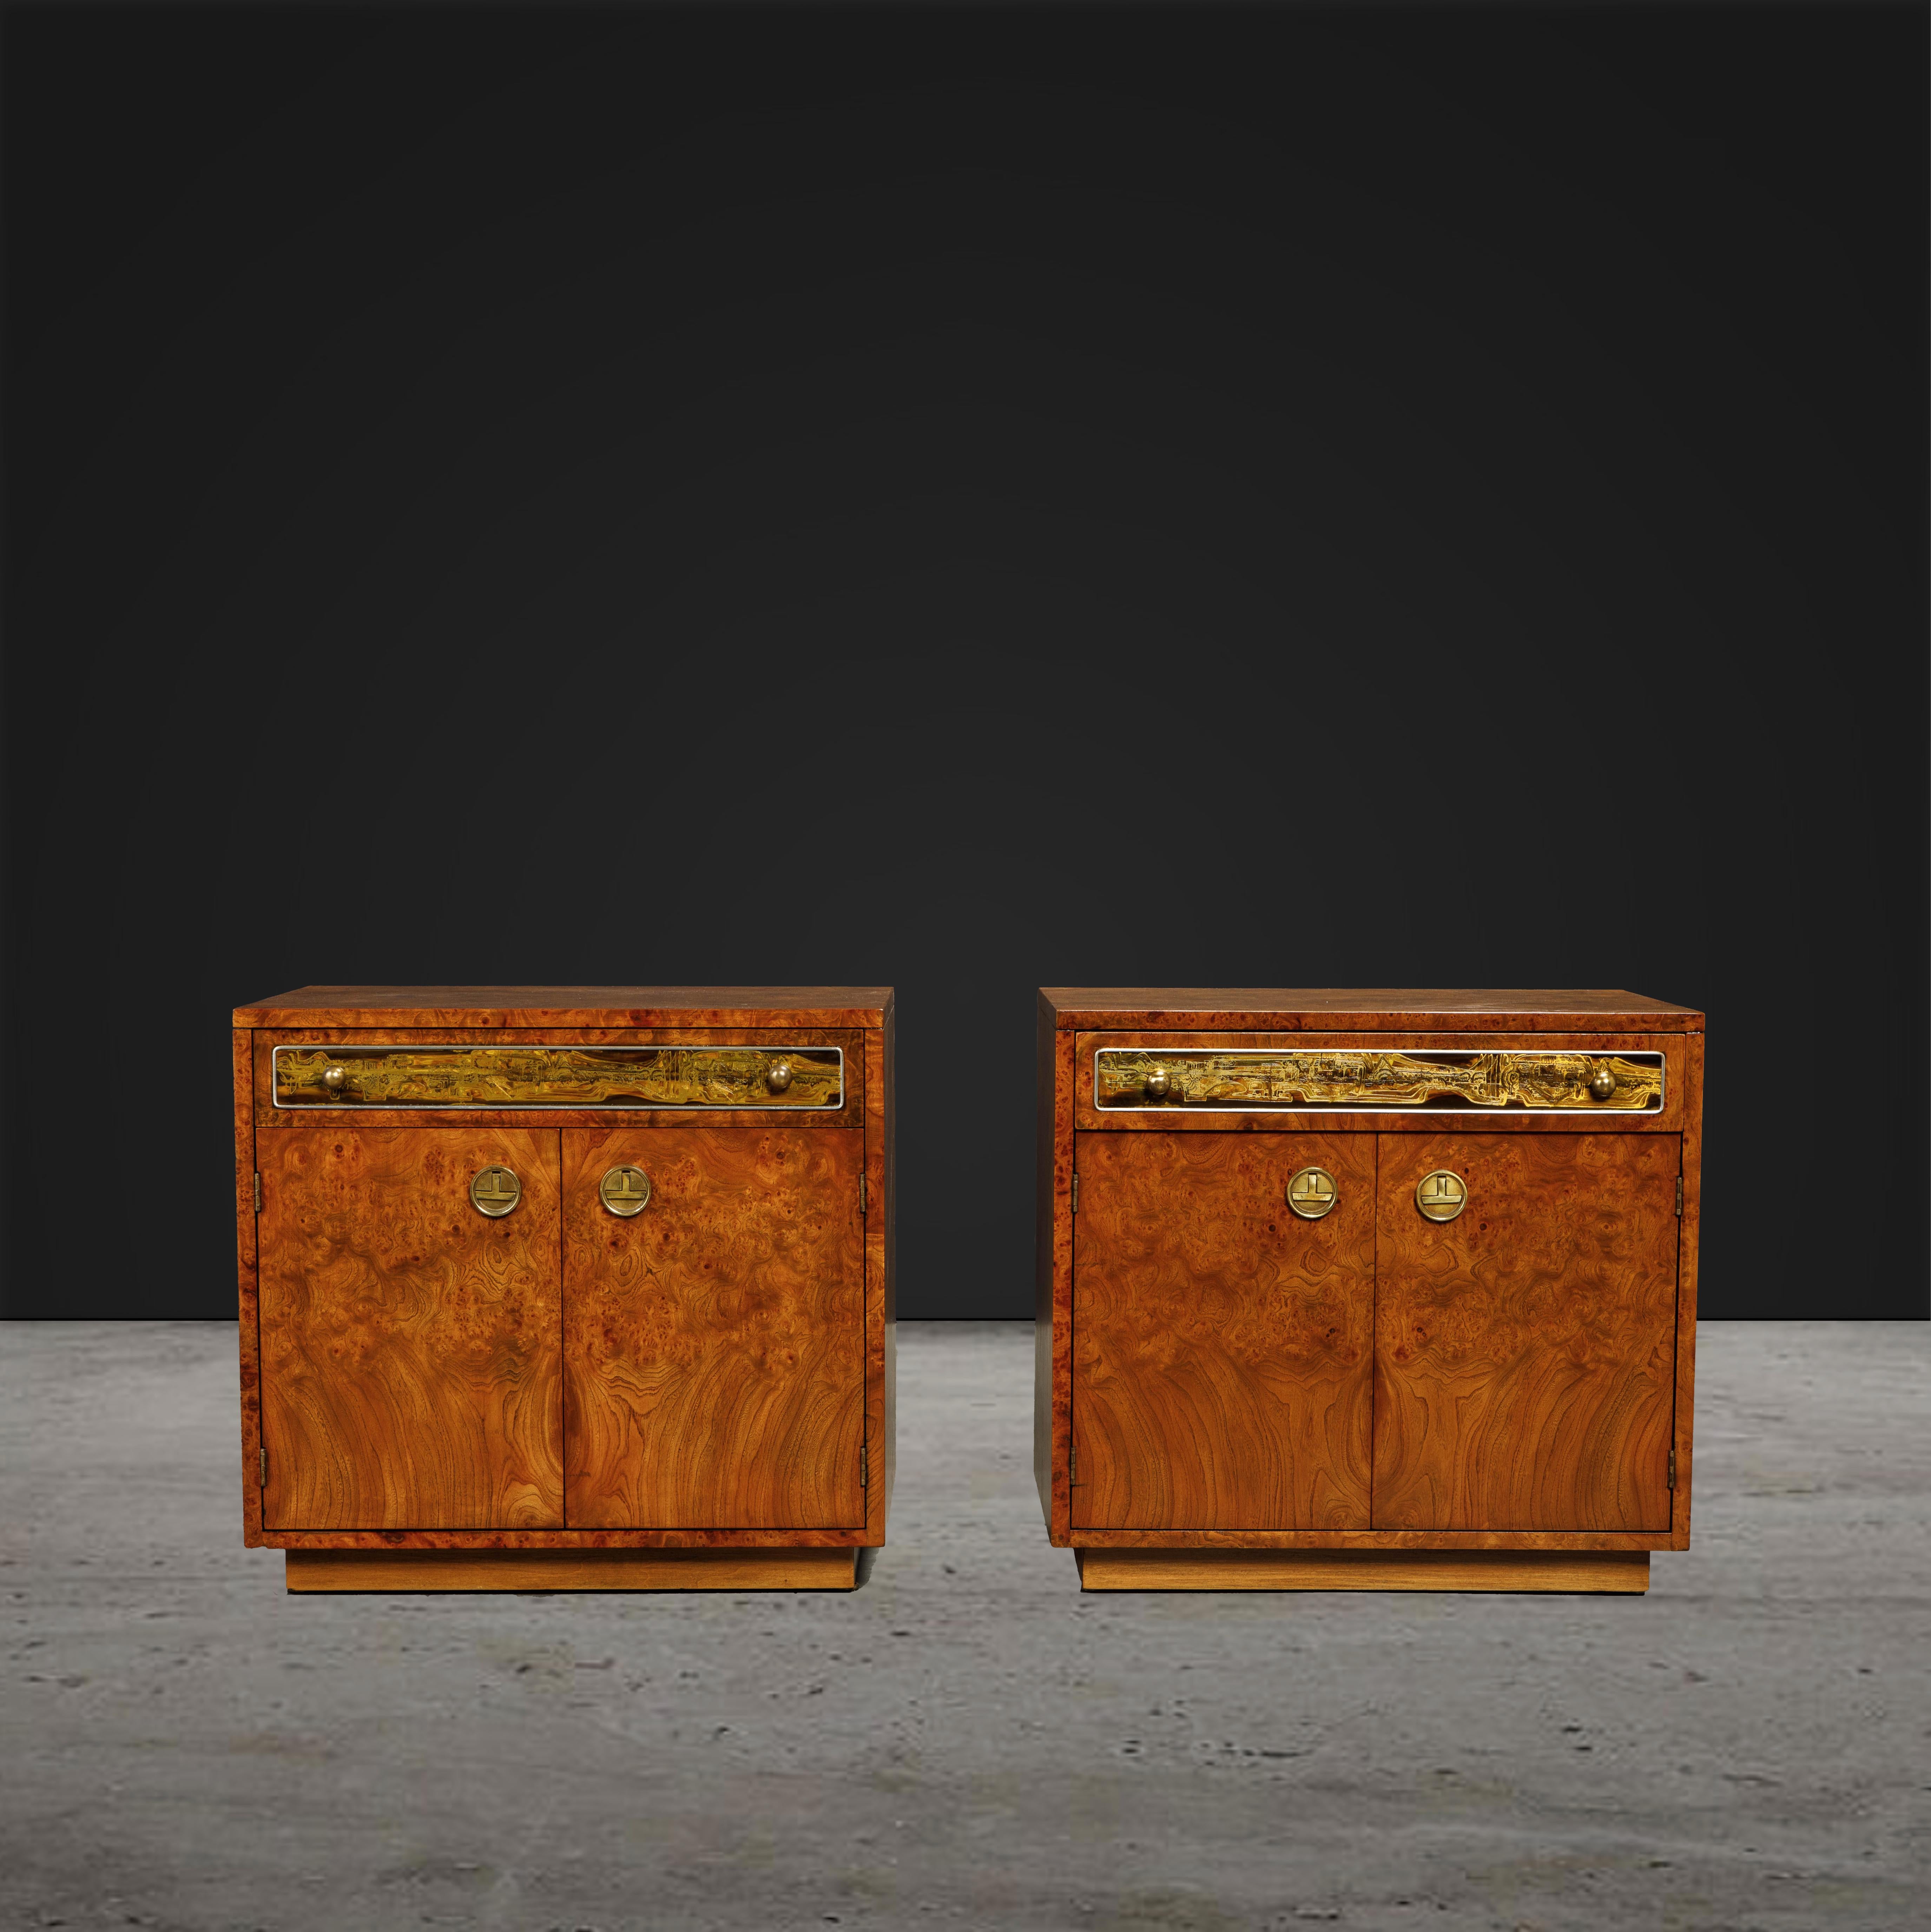 These newly refinished nightstands by Bernhard Rohne for Mastercraft are simply incredible, from the striking deep grained burl to the refined brass pulls and mesmerizing acid-etched art panels - this is the perfect finishing piece for a